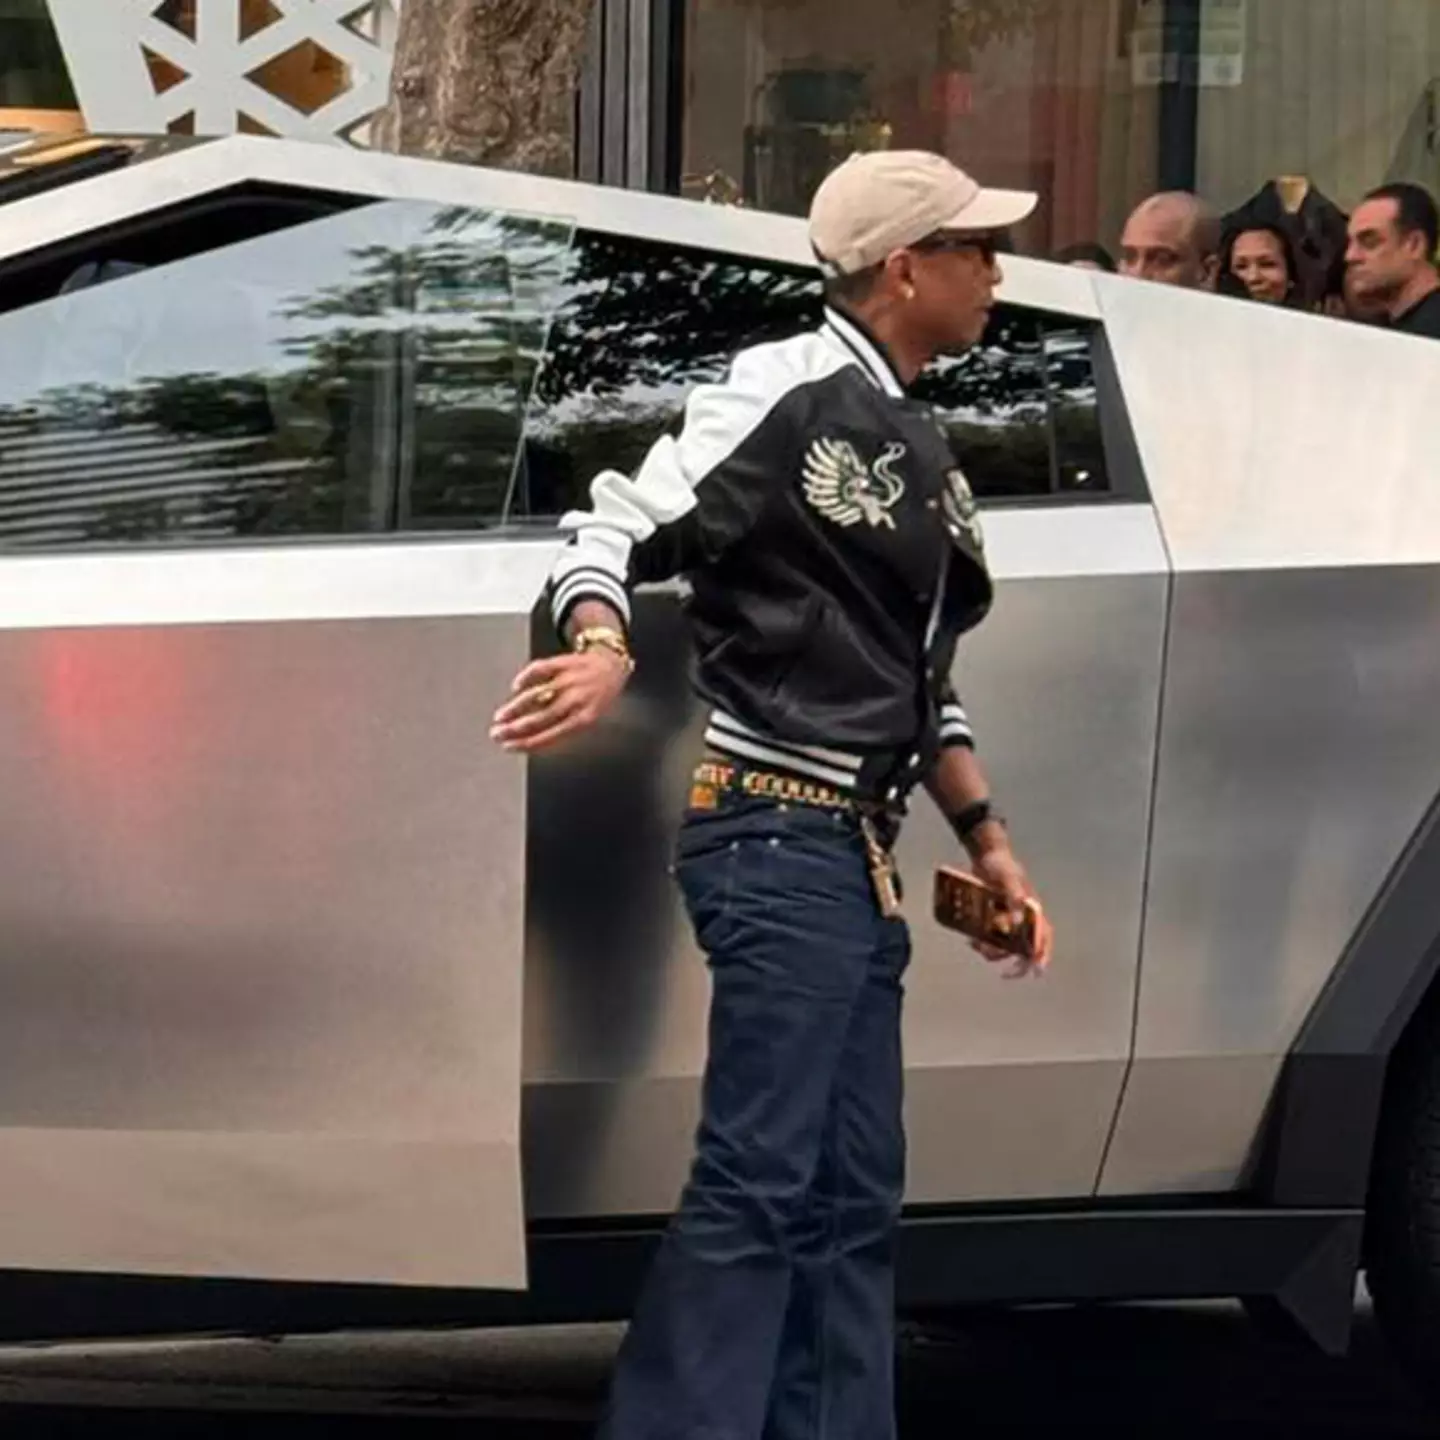 Pharrell goes viral after struggling to parallel park his Cybertruck